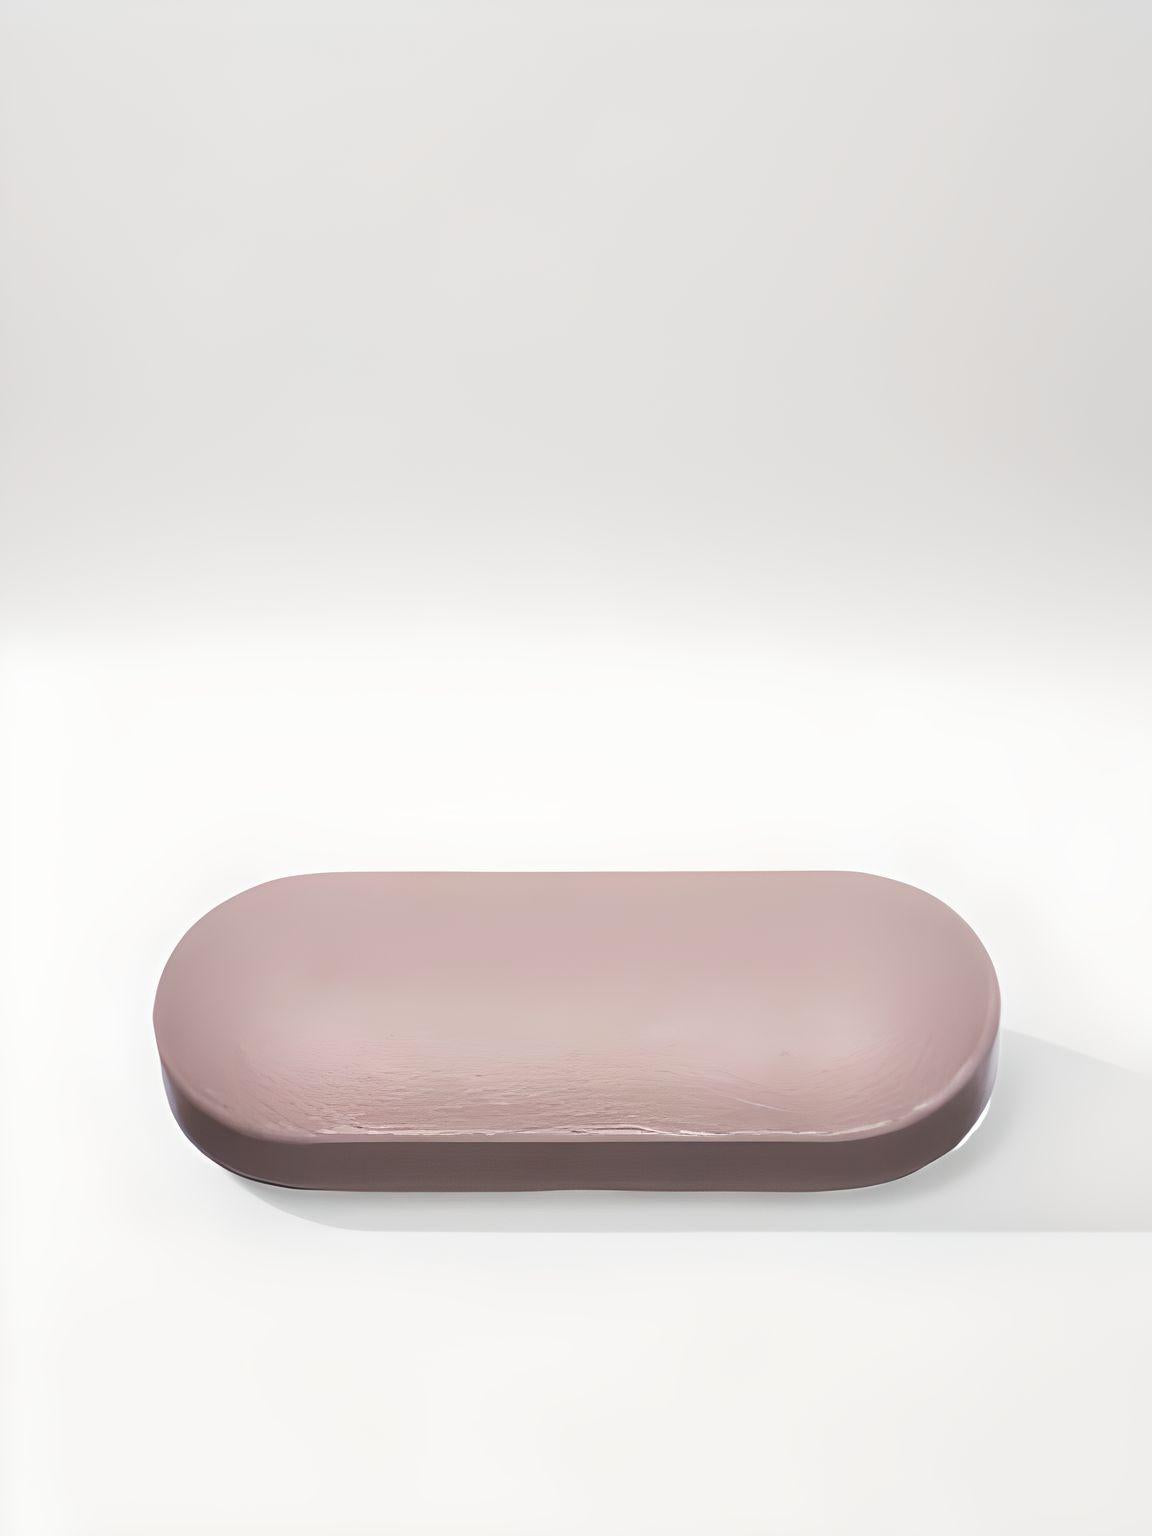 a pink object sitting on top of a white surface